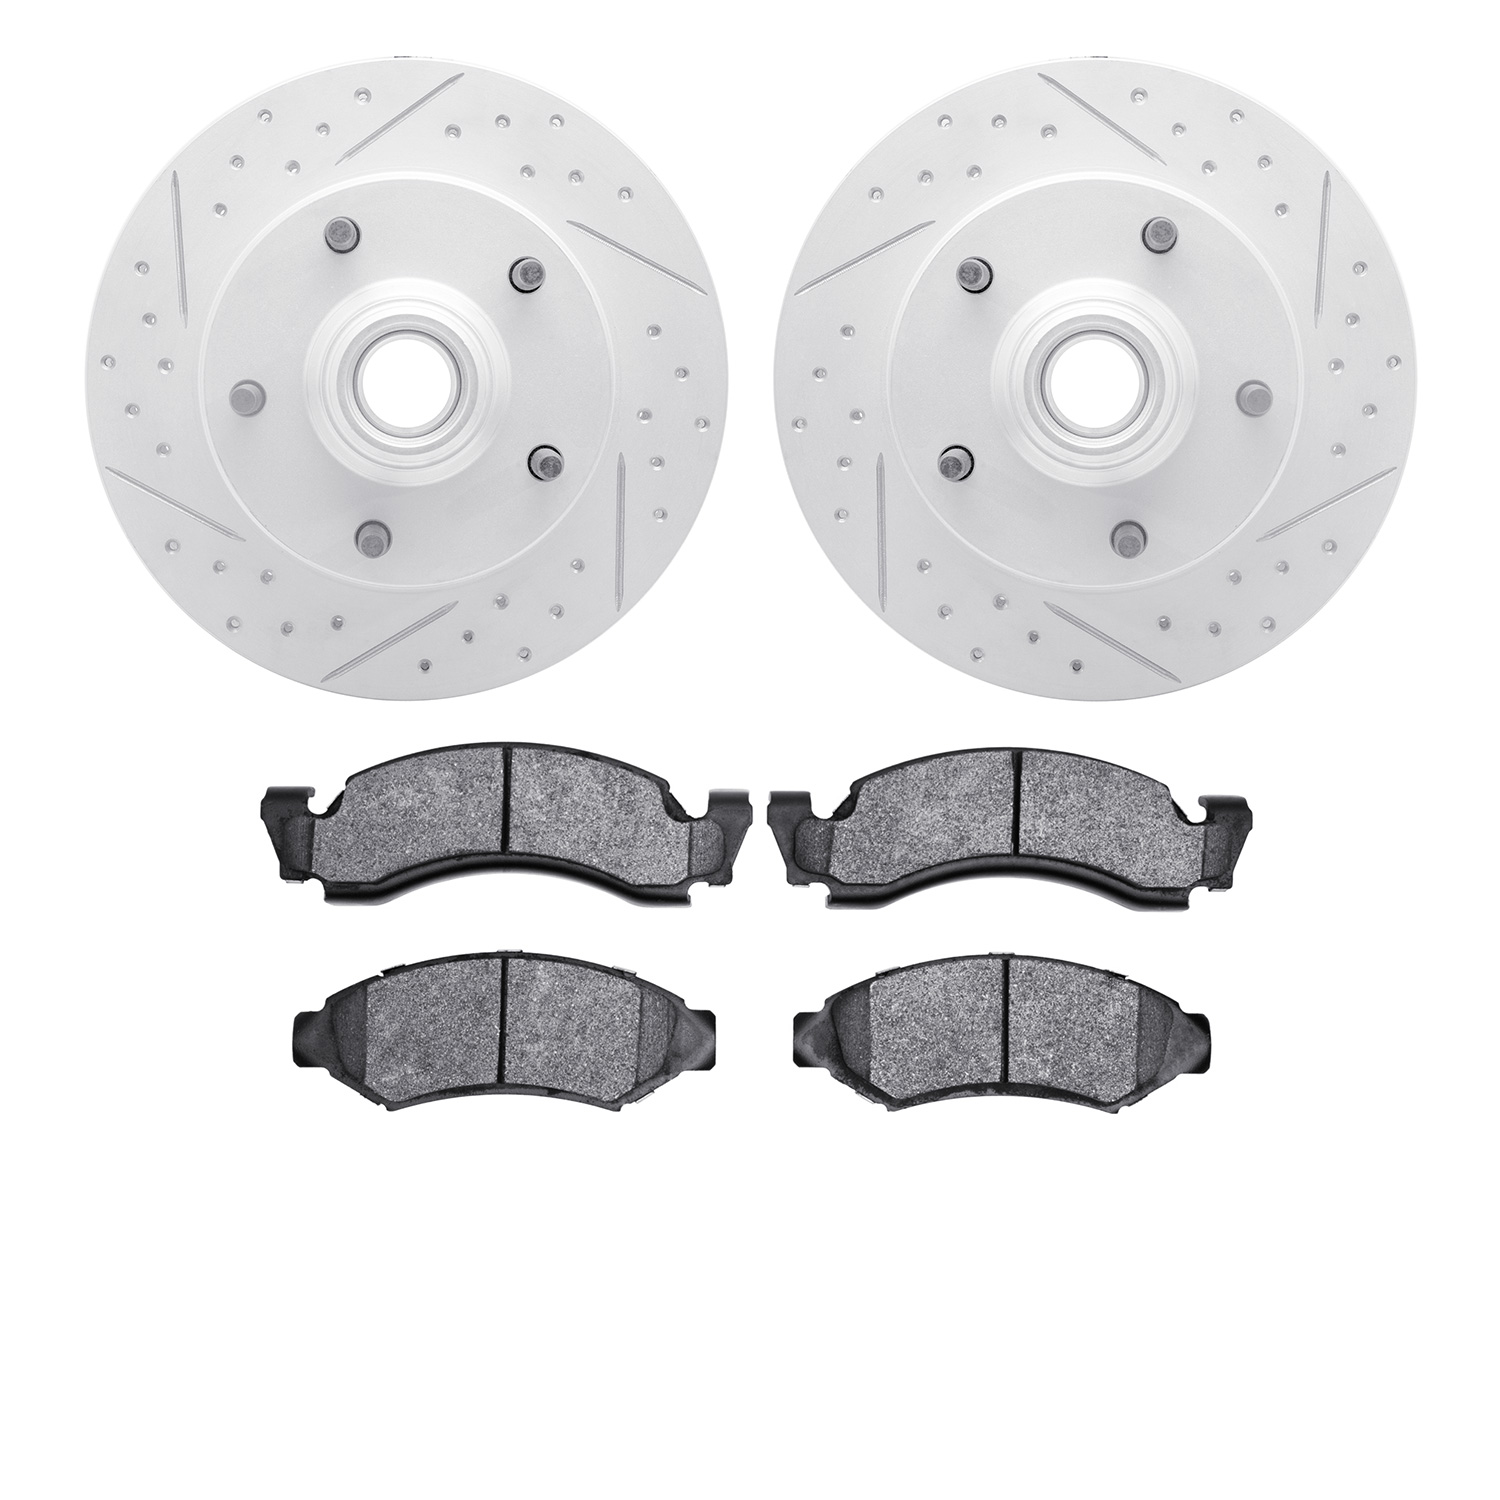 2402-54003 Geoperformance Drilled/Slotted Brake Rotors with Ultimate-Duty Brake Pads Kit, 1986-1993 Ford/Lincoln/Mercury/Mazda,